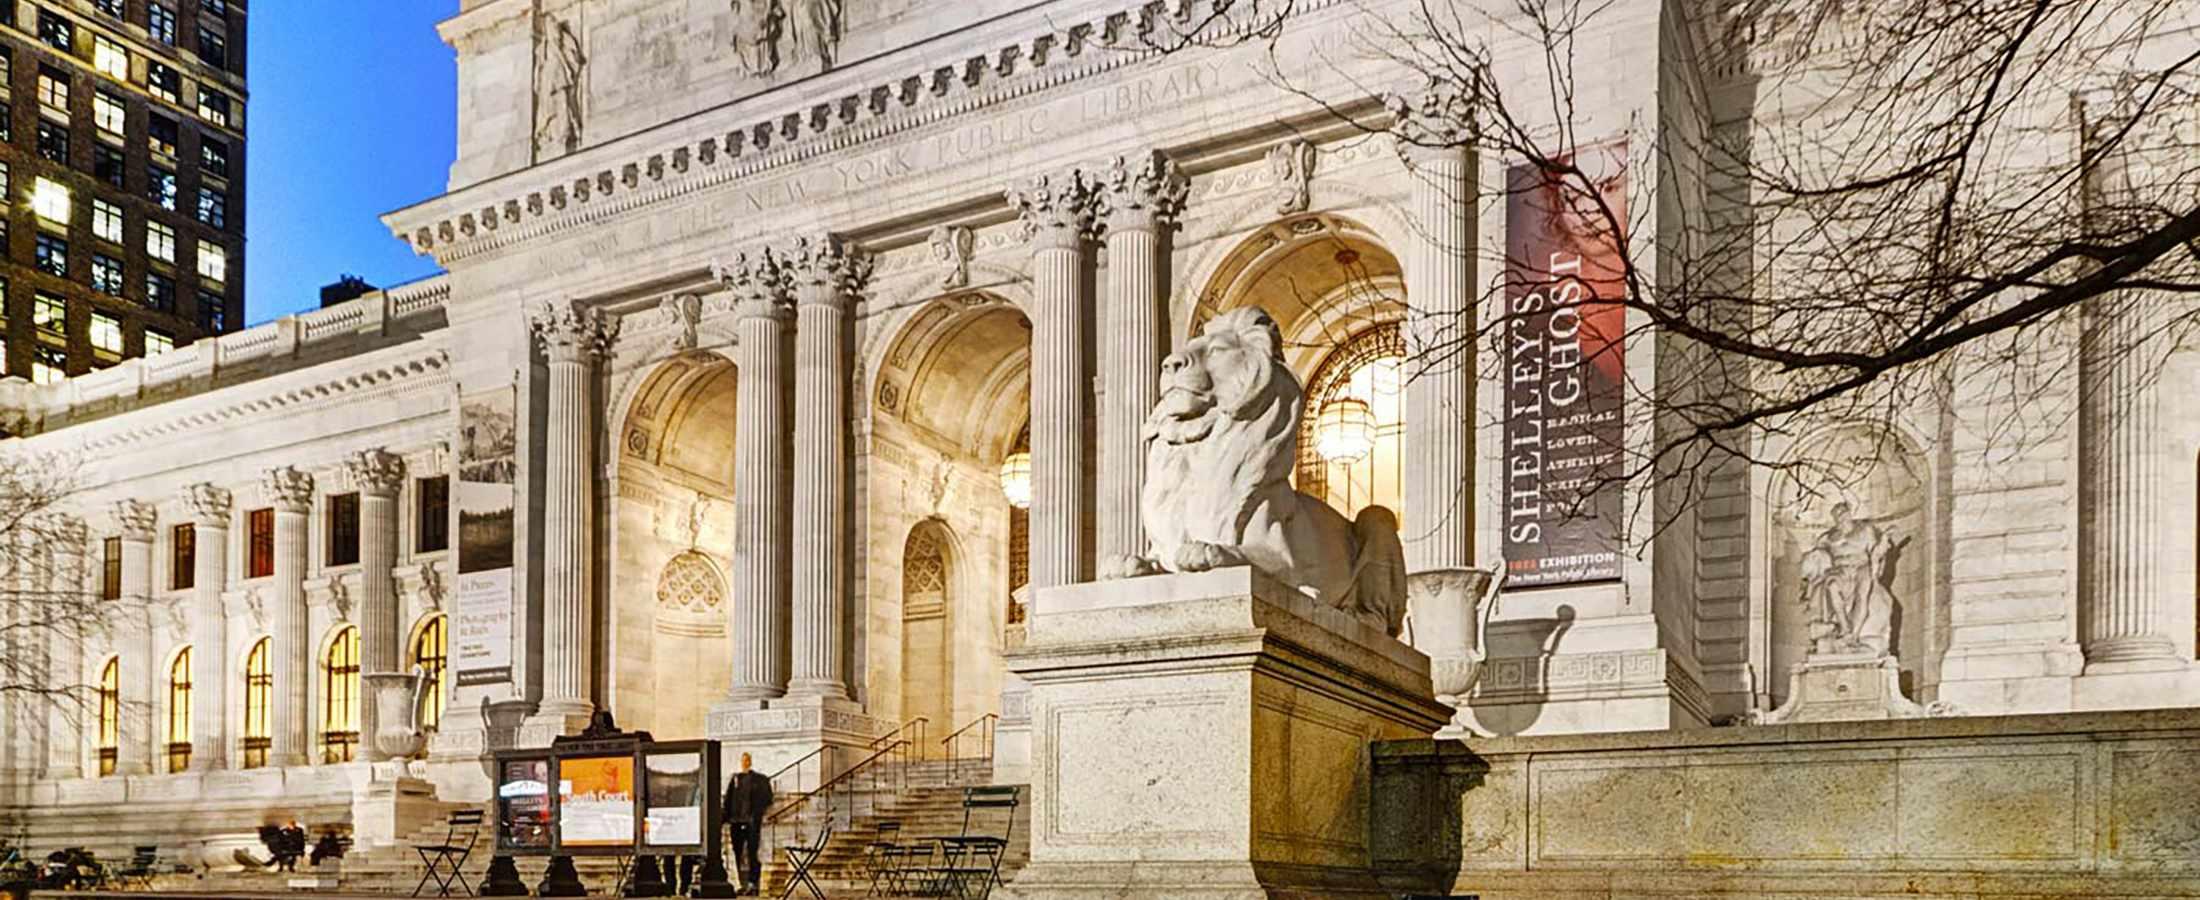 The Library Hotel is just steps from the iconic New York Public Library!